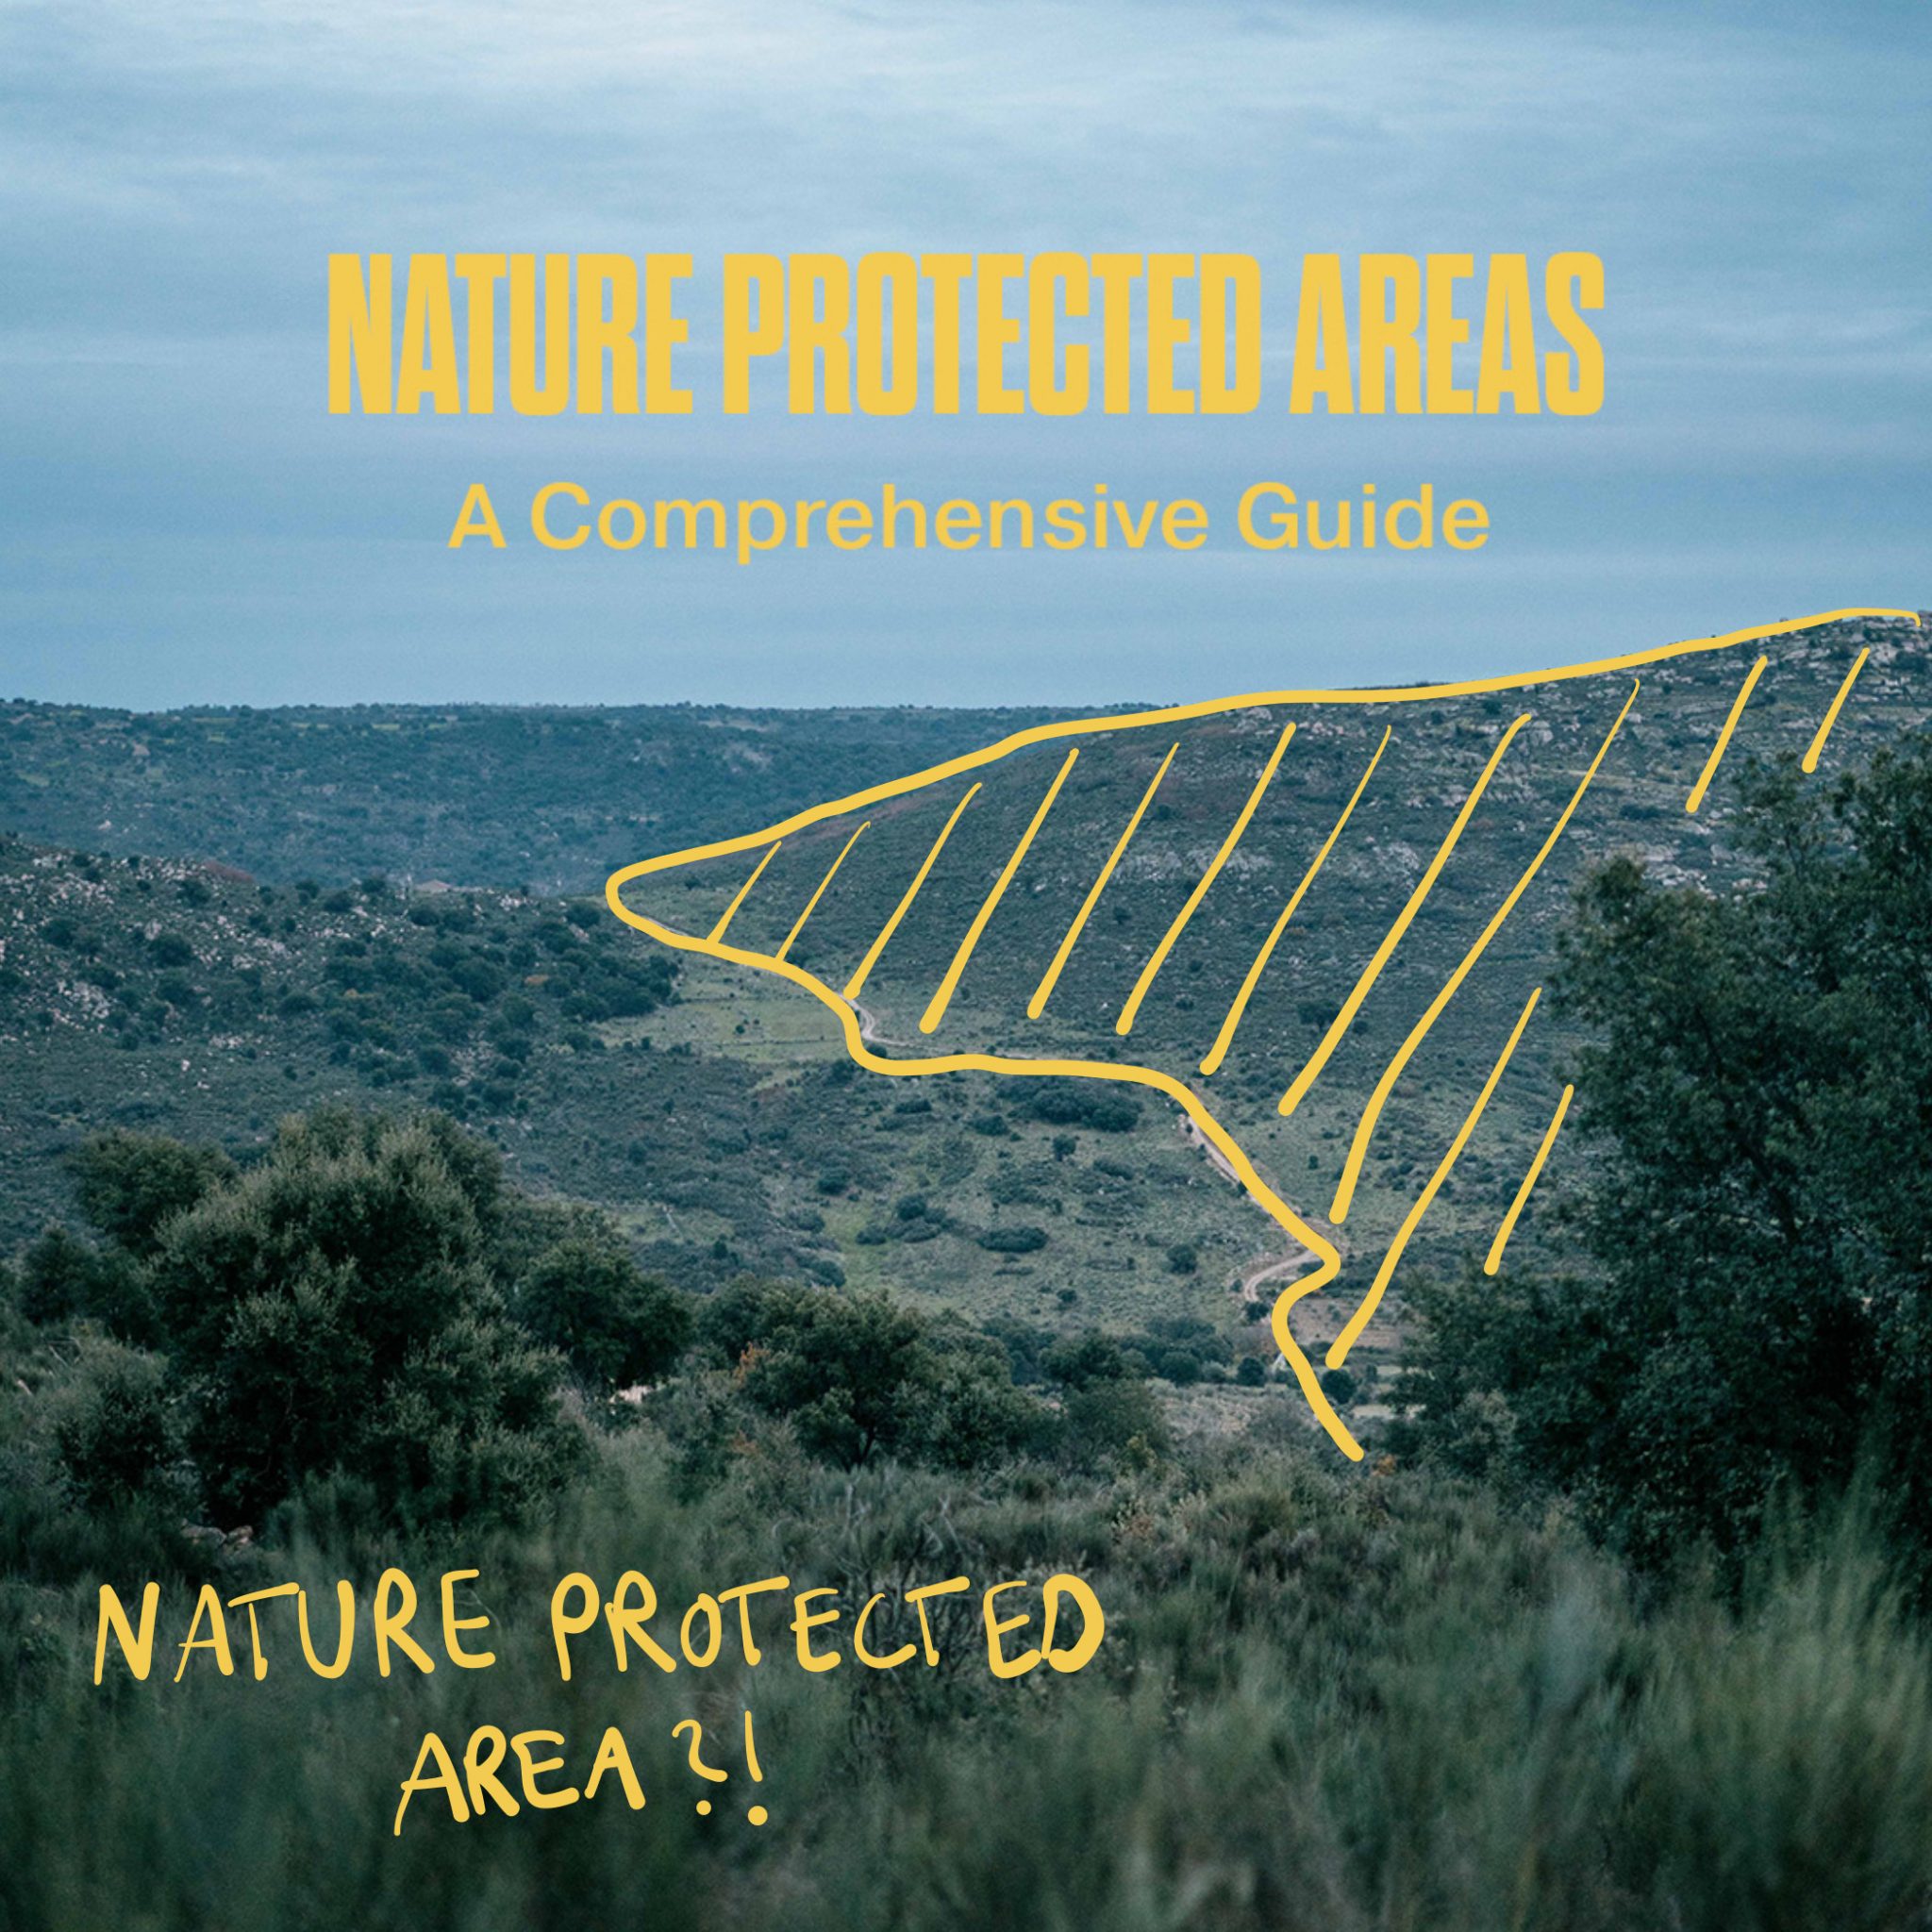 A panoramic shot of a landscape with a drawing and the headline "Nature Protected Areas. A Comprehensive Guide".